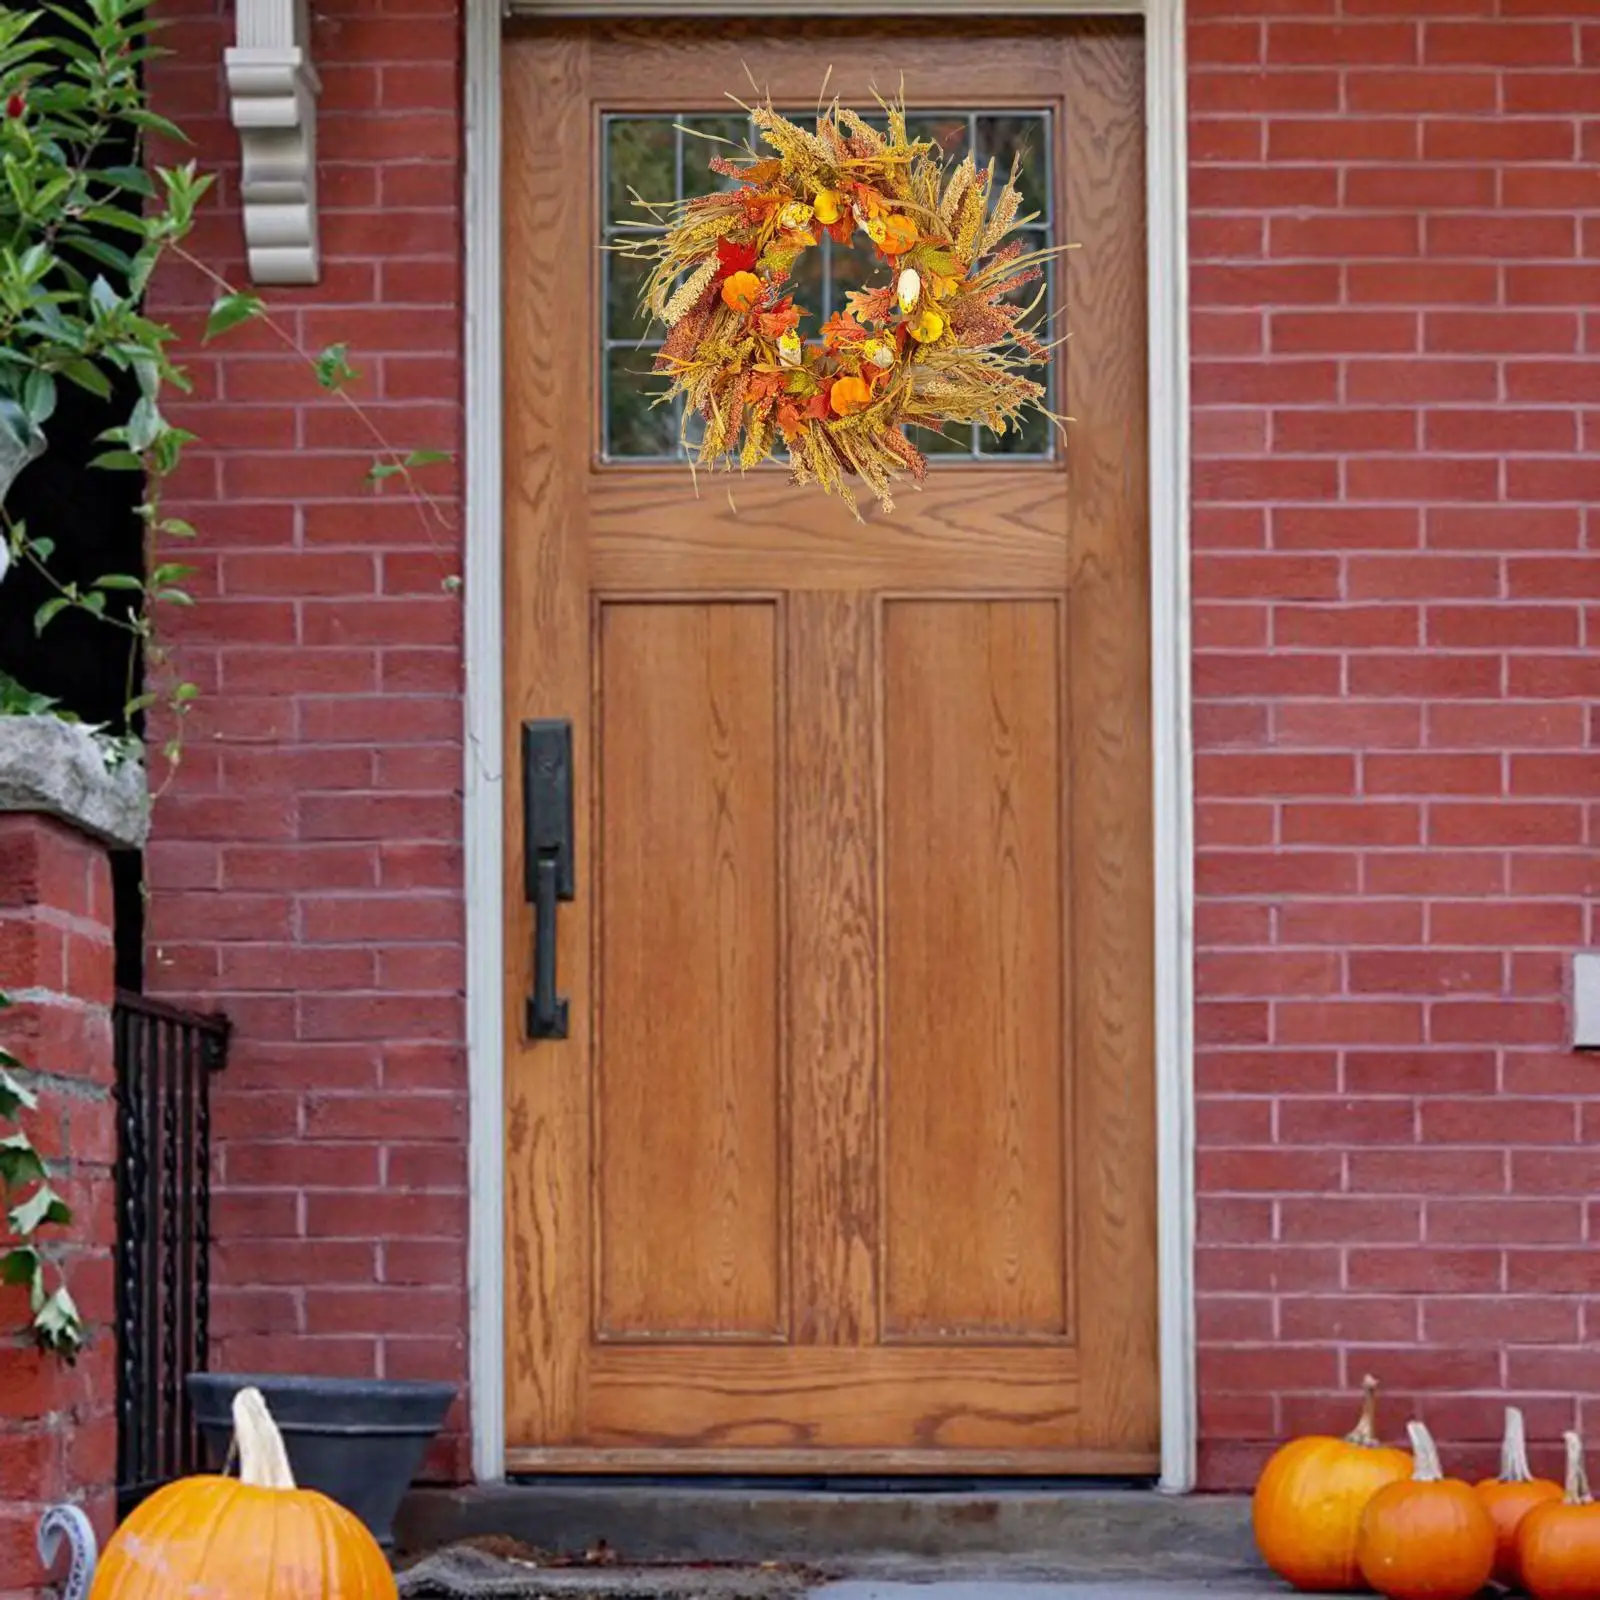 17.7inch Fall Wreath Front Door Harvest Artificial Garland Indoor Outdoor Hanger Farmhouse for Table Porch Party Wedding Home